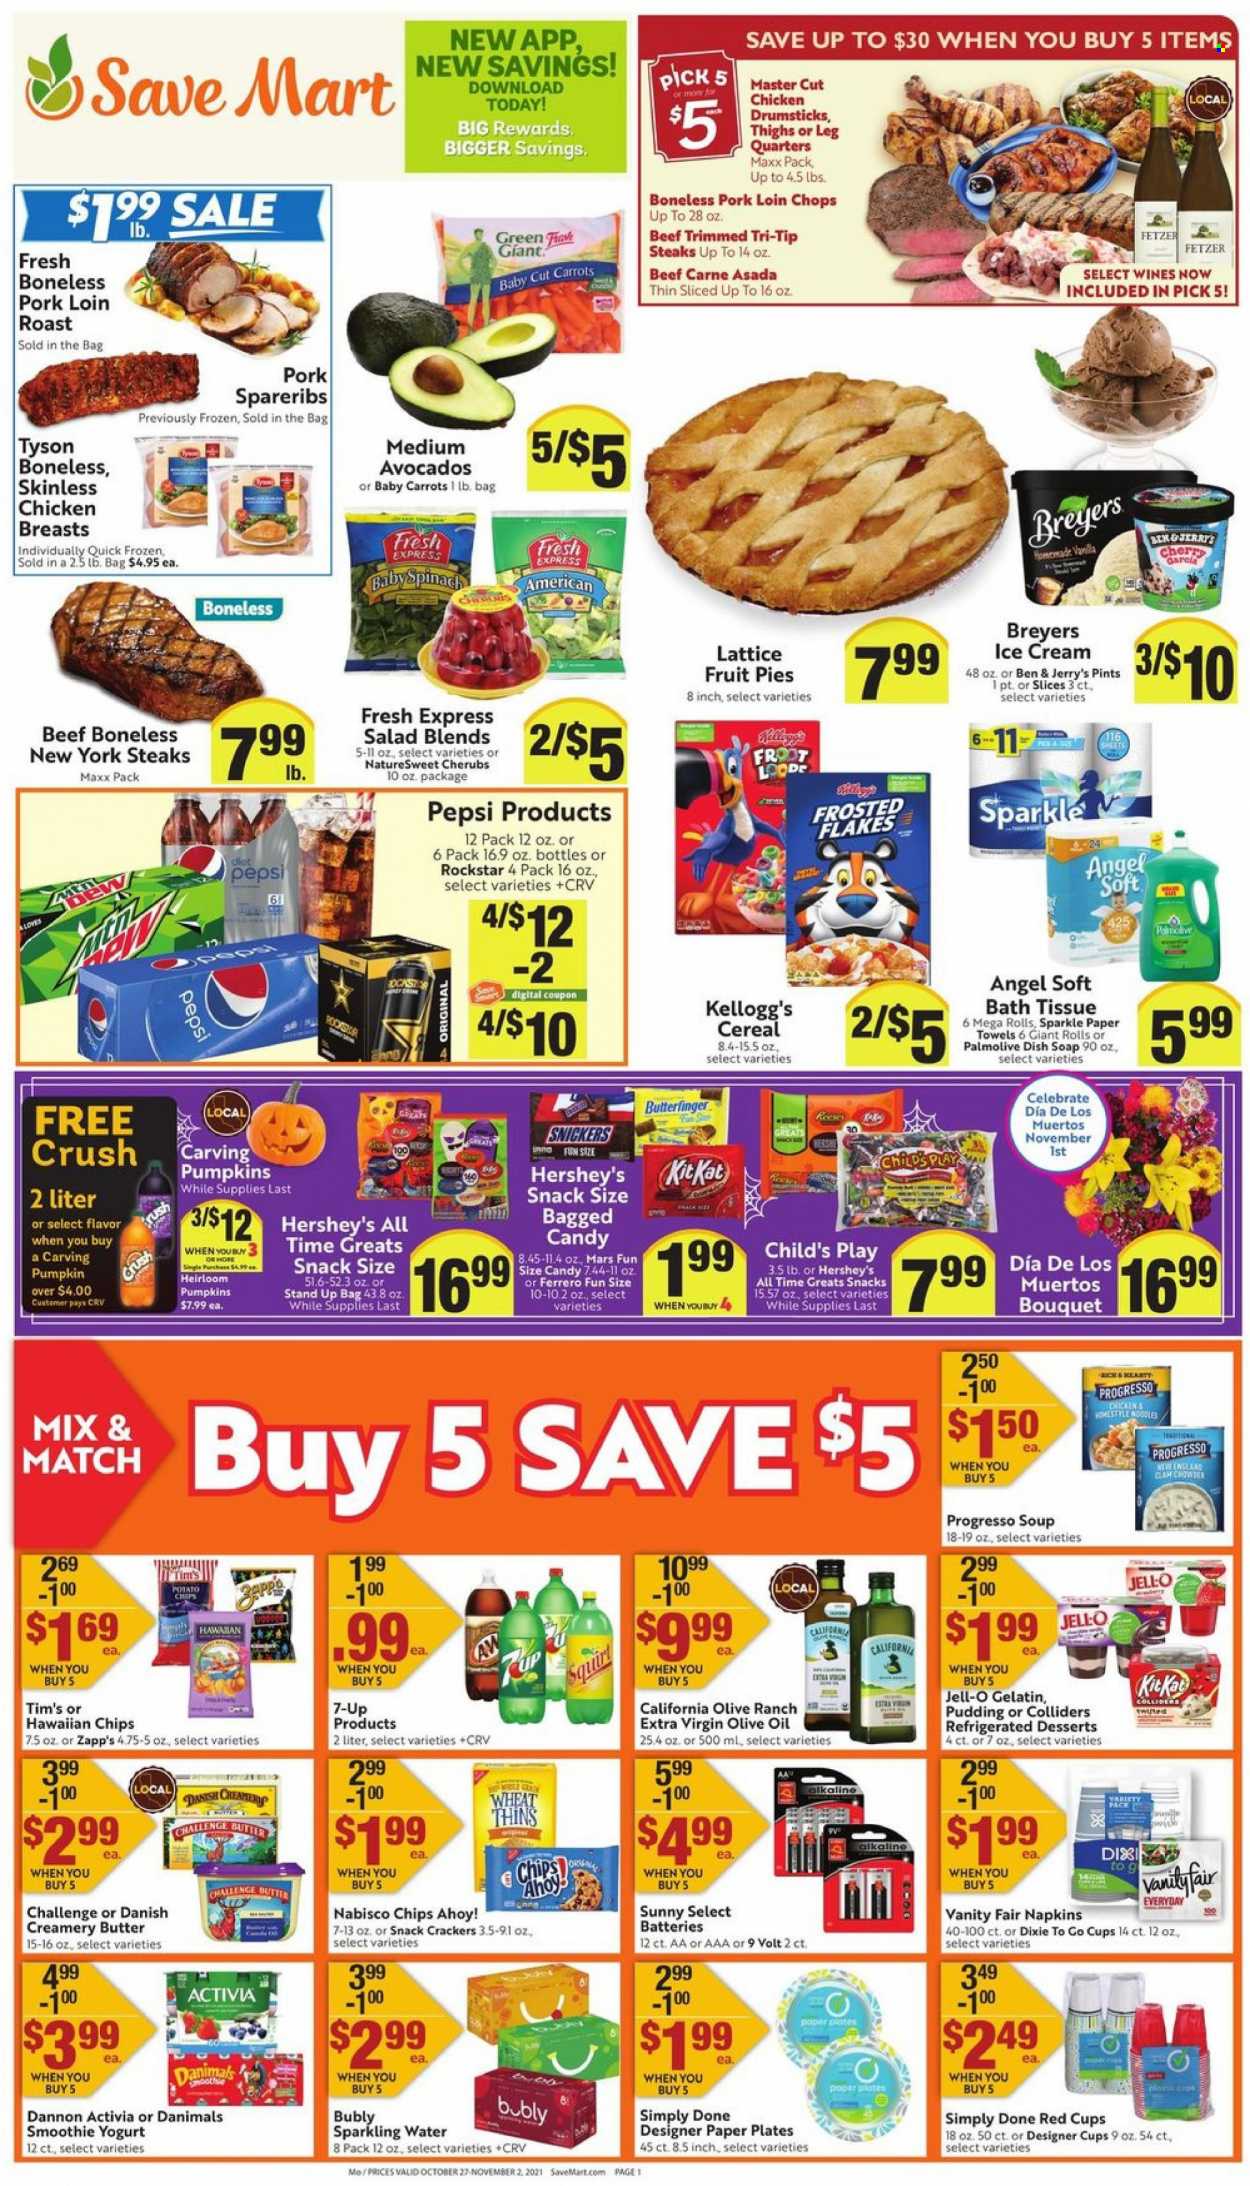 thumbnail - Save Mart Flyer - 10/27/2021 - 11/02/2021 - Sales products - carrots, pumpkin, salad, cherries, chicken breasts, chicken drumsticks, steak, pork chops, pork loin, pork meat, pork spare ribs, noodles, Progresso, pudding, yoghurt, Activia, Dannon, Danimals, butter, ice cream, Reese's, Hershey's, Ben & Jerry's, Ferrero Rocher, Snickers, Mars, crackers, Kellogg's, Chips Ahoy!, Thins, Jell-O, cereals, Frosted Flakes, extra virgin olive oil, olive oil, oil, Pepsi, Diet Pepsi, 7UP, Rockstar, smoothie, sparkling water, napkins, Palmolive, soap, paper plate, Dixie. Page 1.